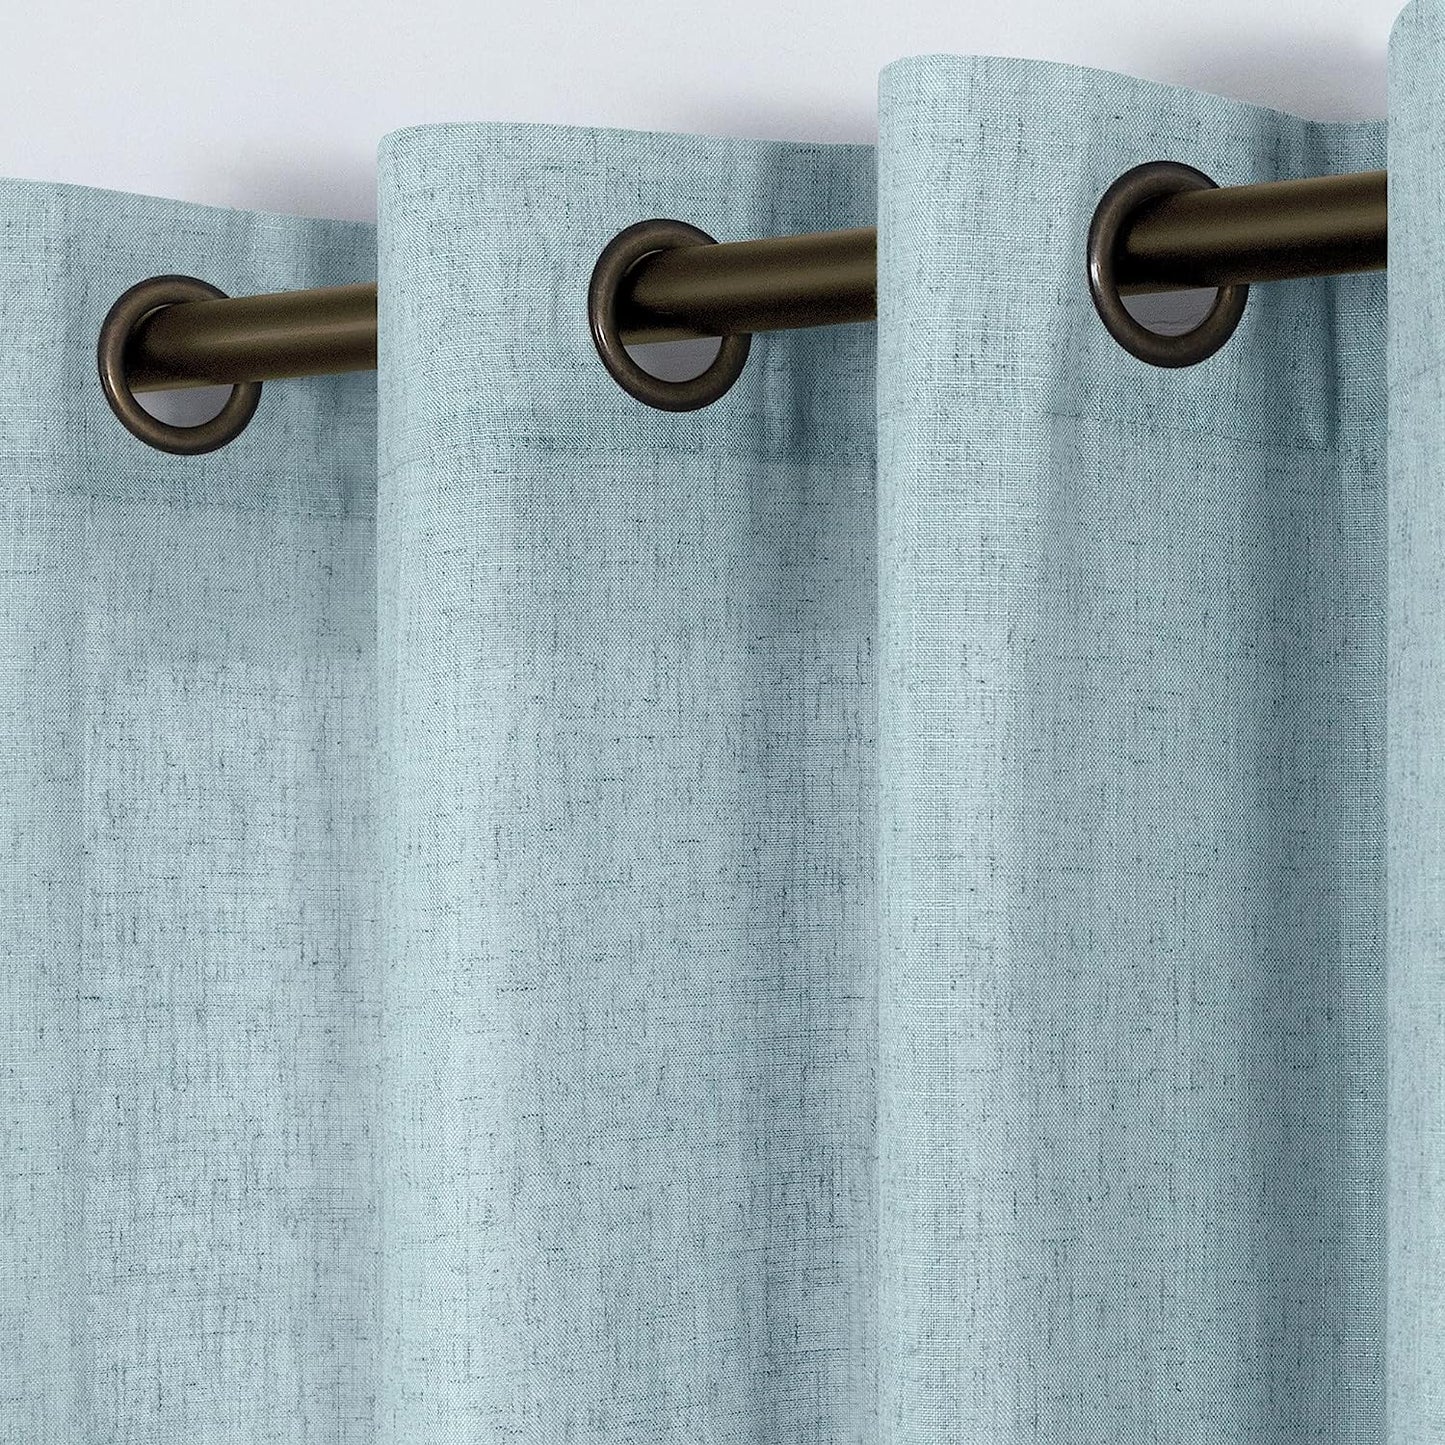 KOUFALL Beige Rustic Country Curtains for Living Room 84 Inches Long Flax Linen Bronze Grommet Tan Sand Color Solid Faux Linen Curtains for Bedroom Sliding Glass Patio Door 2 Panels  KOUFALL TEXTILE Sea Green 52X108 